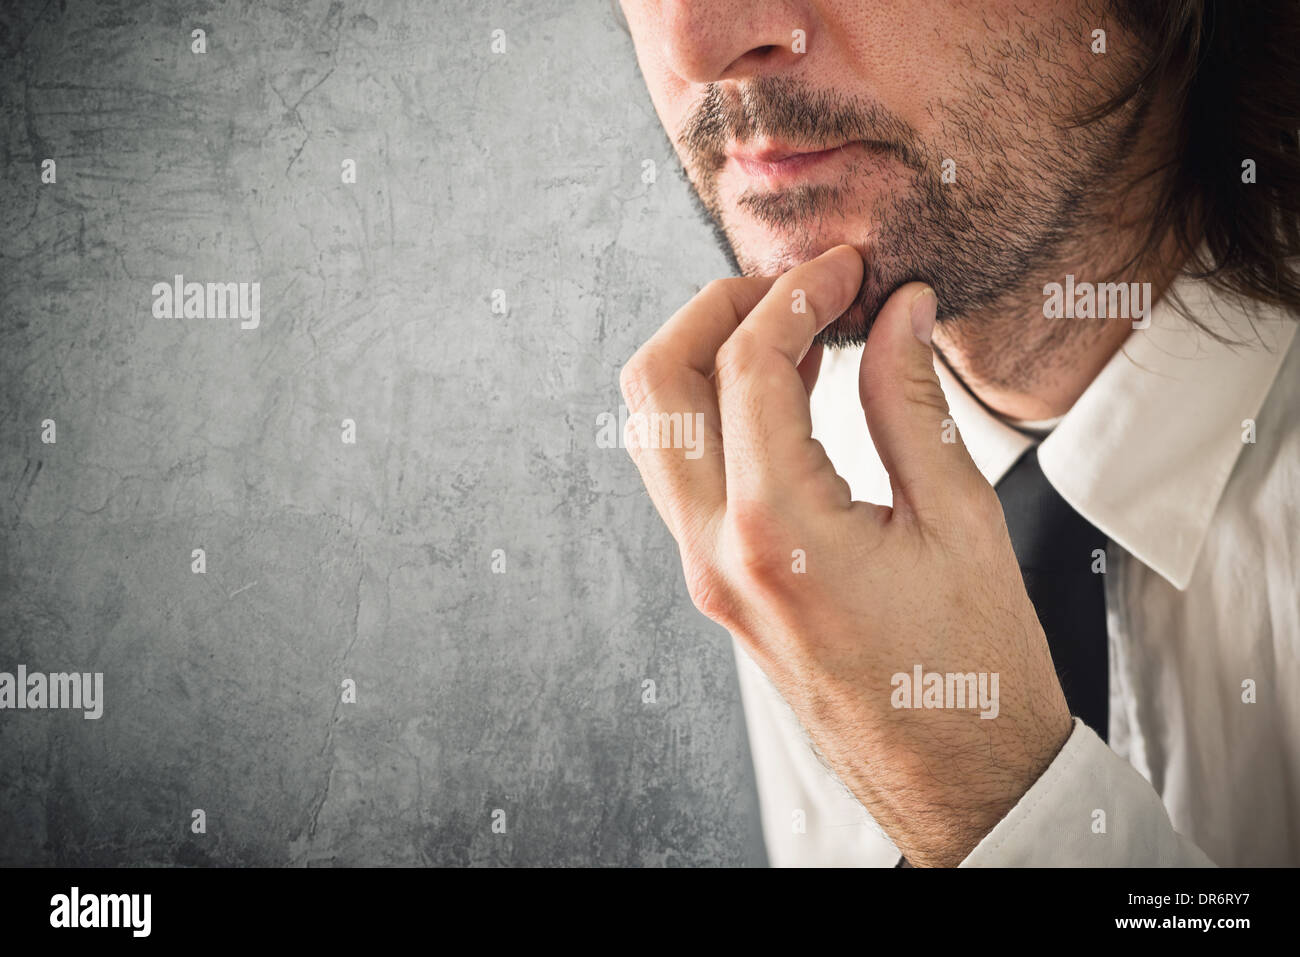 Businessman thinking. Portrait of thoughtful business person. Stock Photo